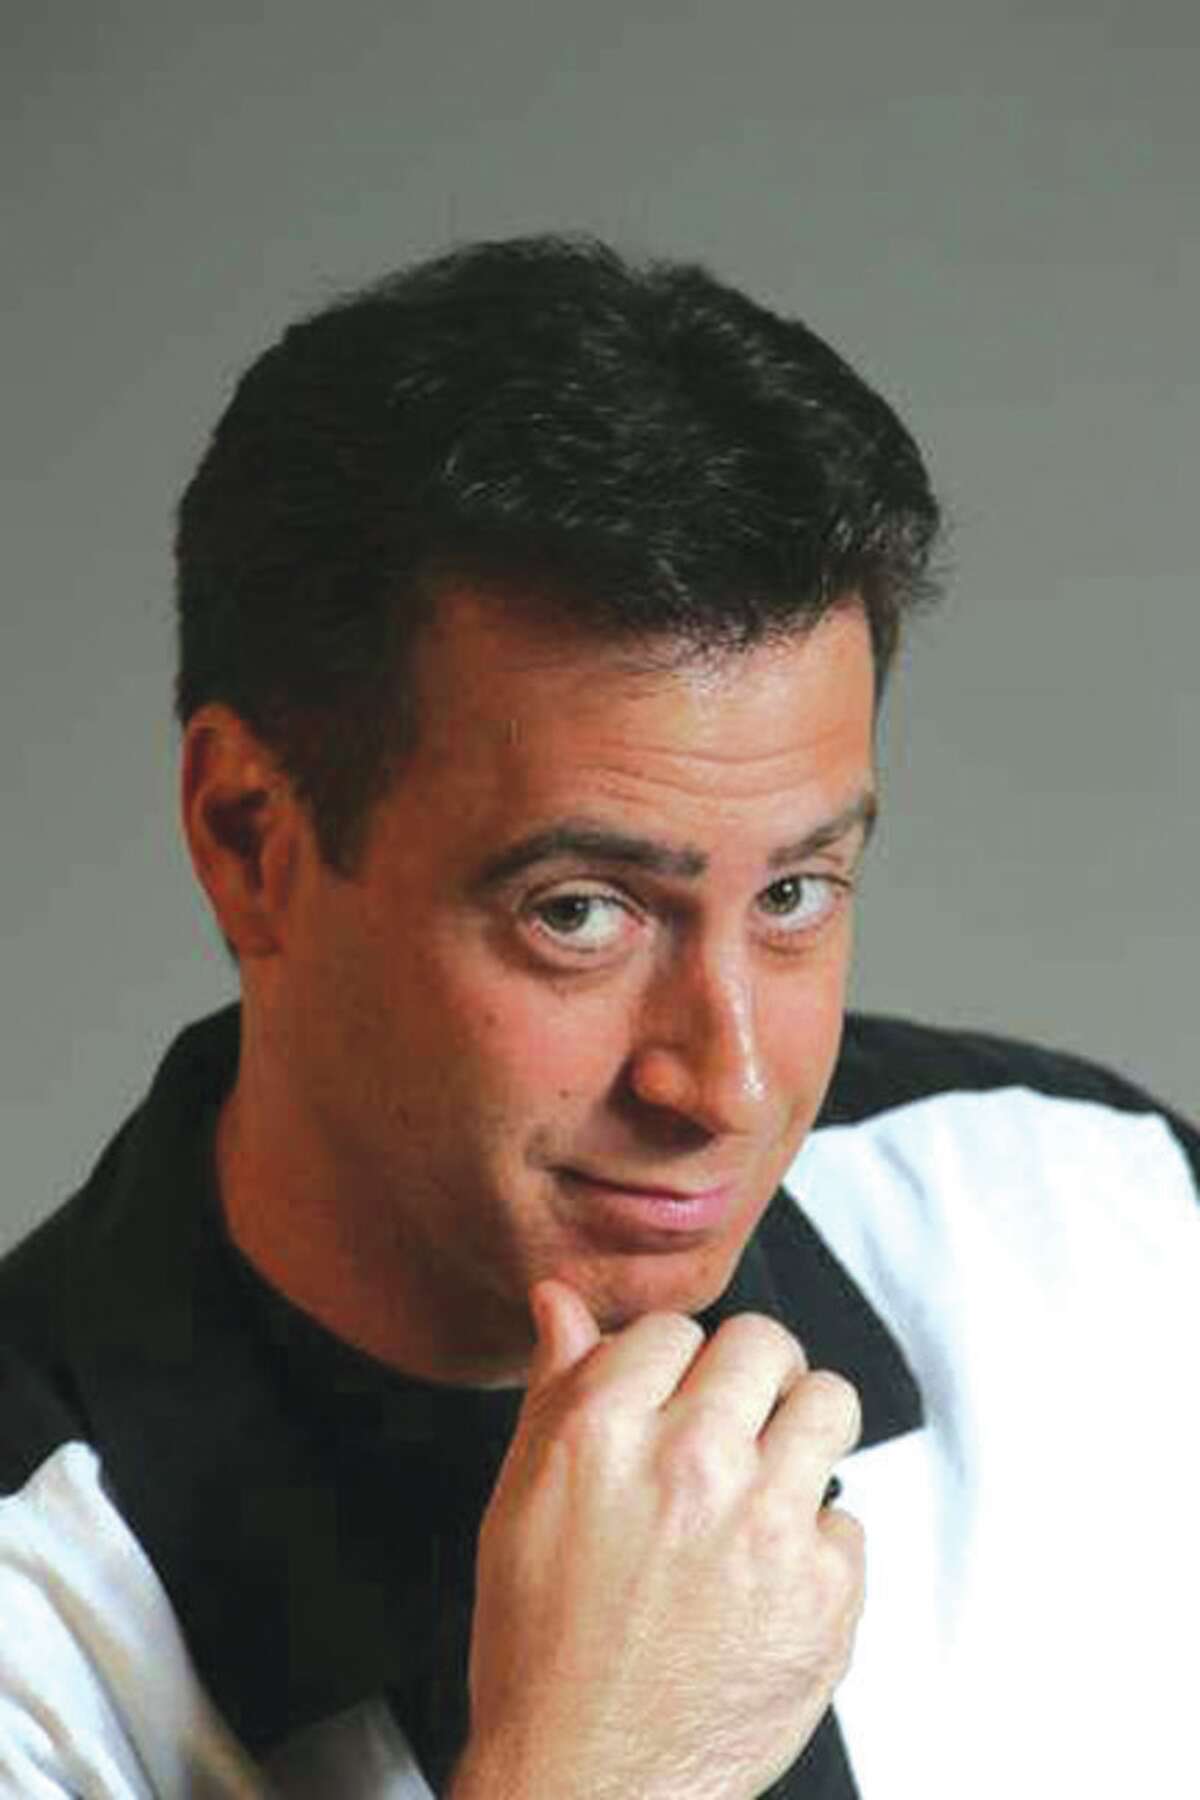 Comedian Mike Toomey will appear at the Wildey Theatre on Feb. 11.